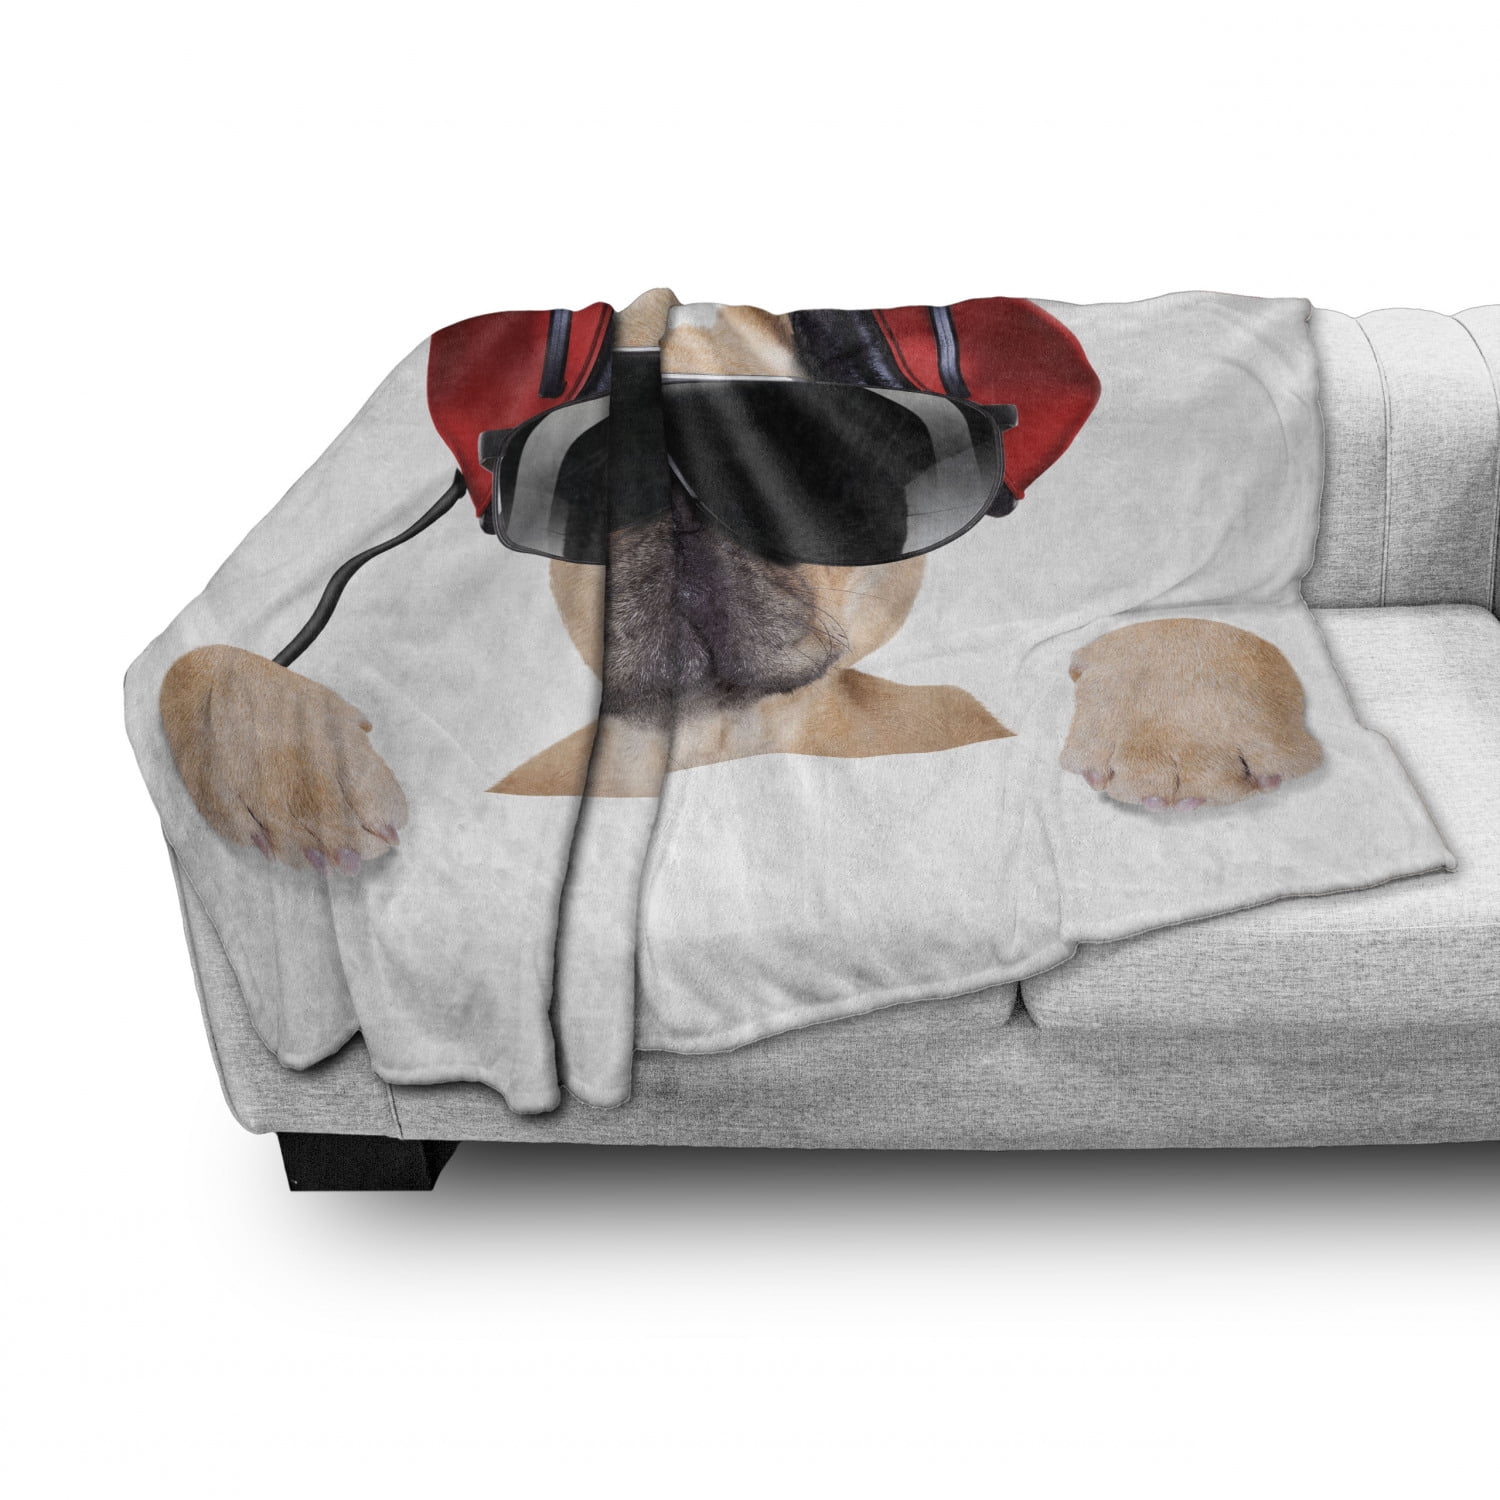 Dj Dog Listening to Music Behind an Empty Ultra-Soft Micro Fleece Blanket Home Decor Warm Anti-Pilling Flannel Throw Blanket for Couch Bed Sofa